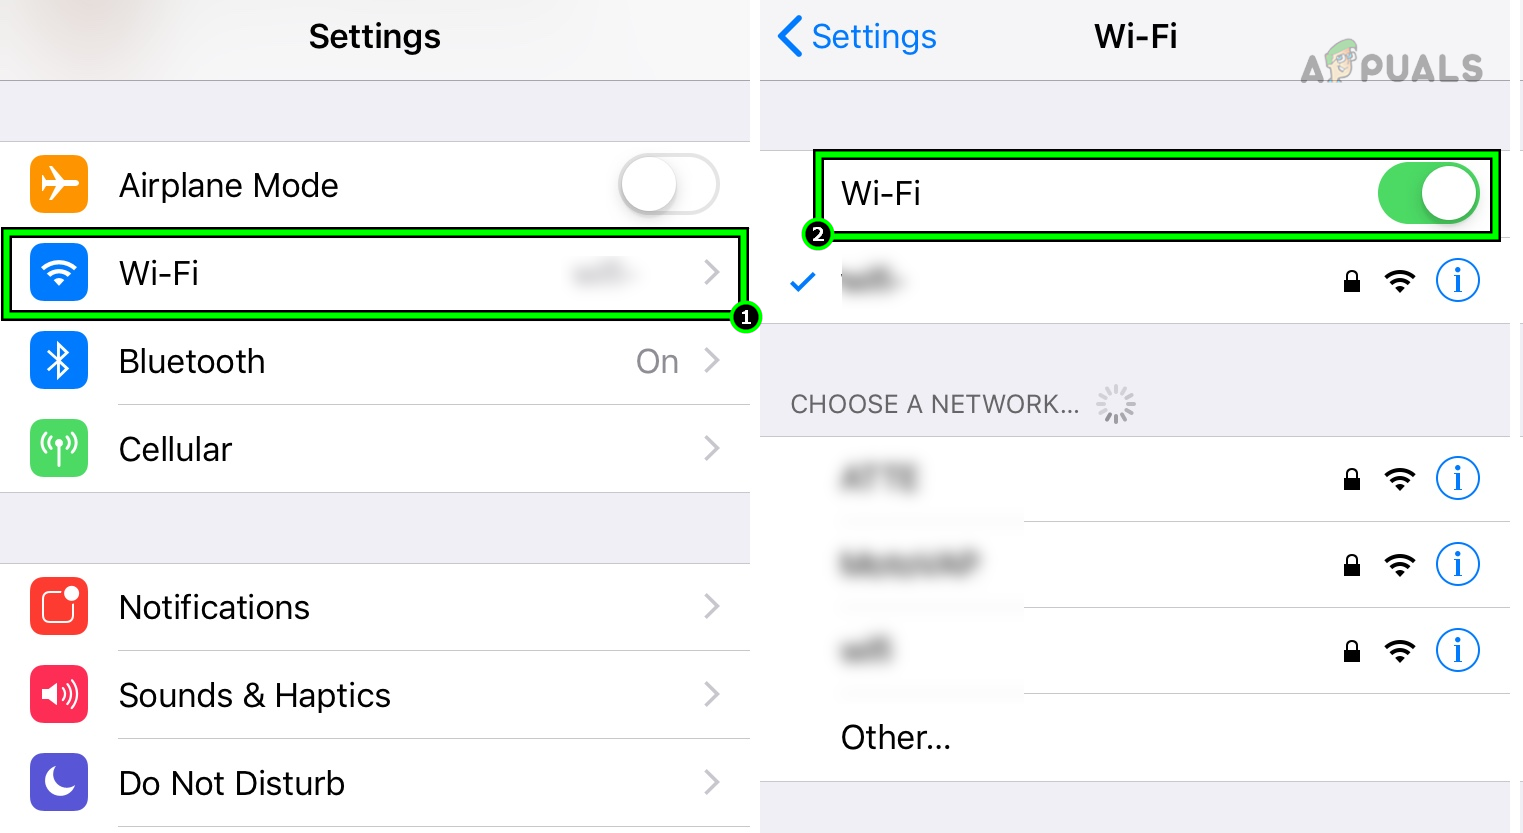 Disable Wi-Fi on the iPhone